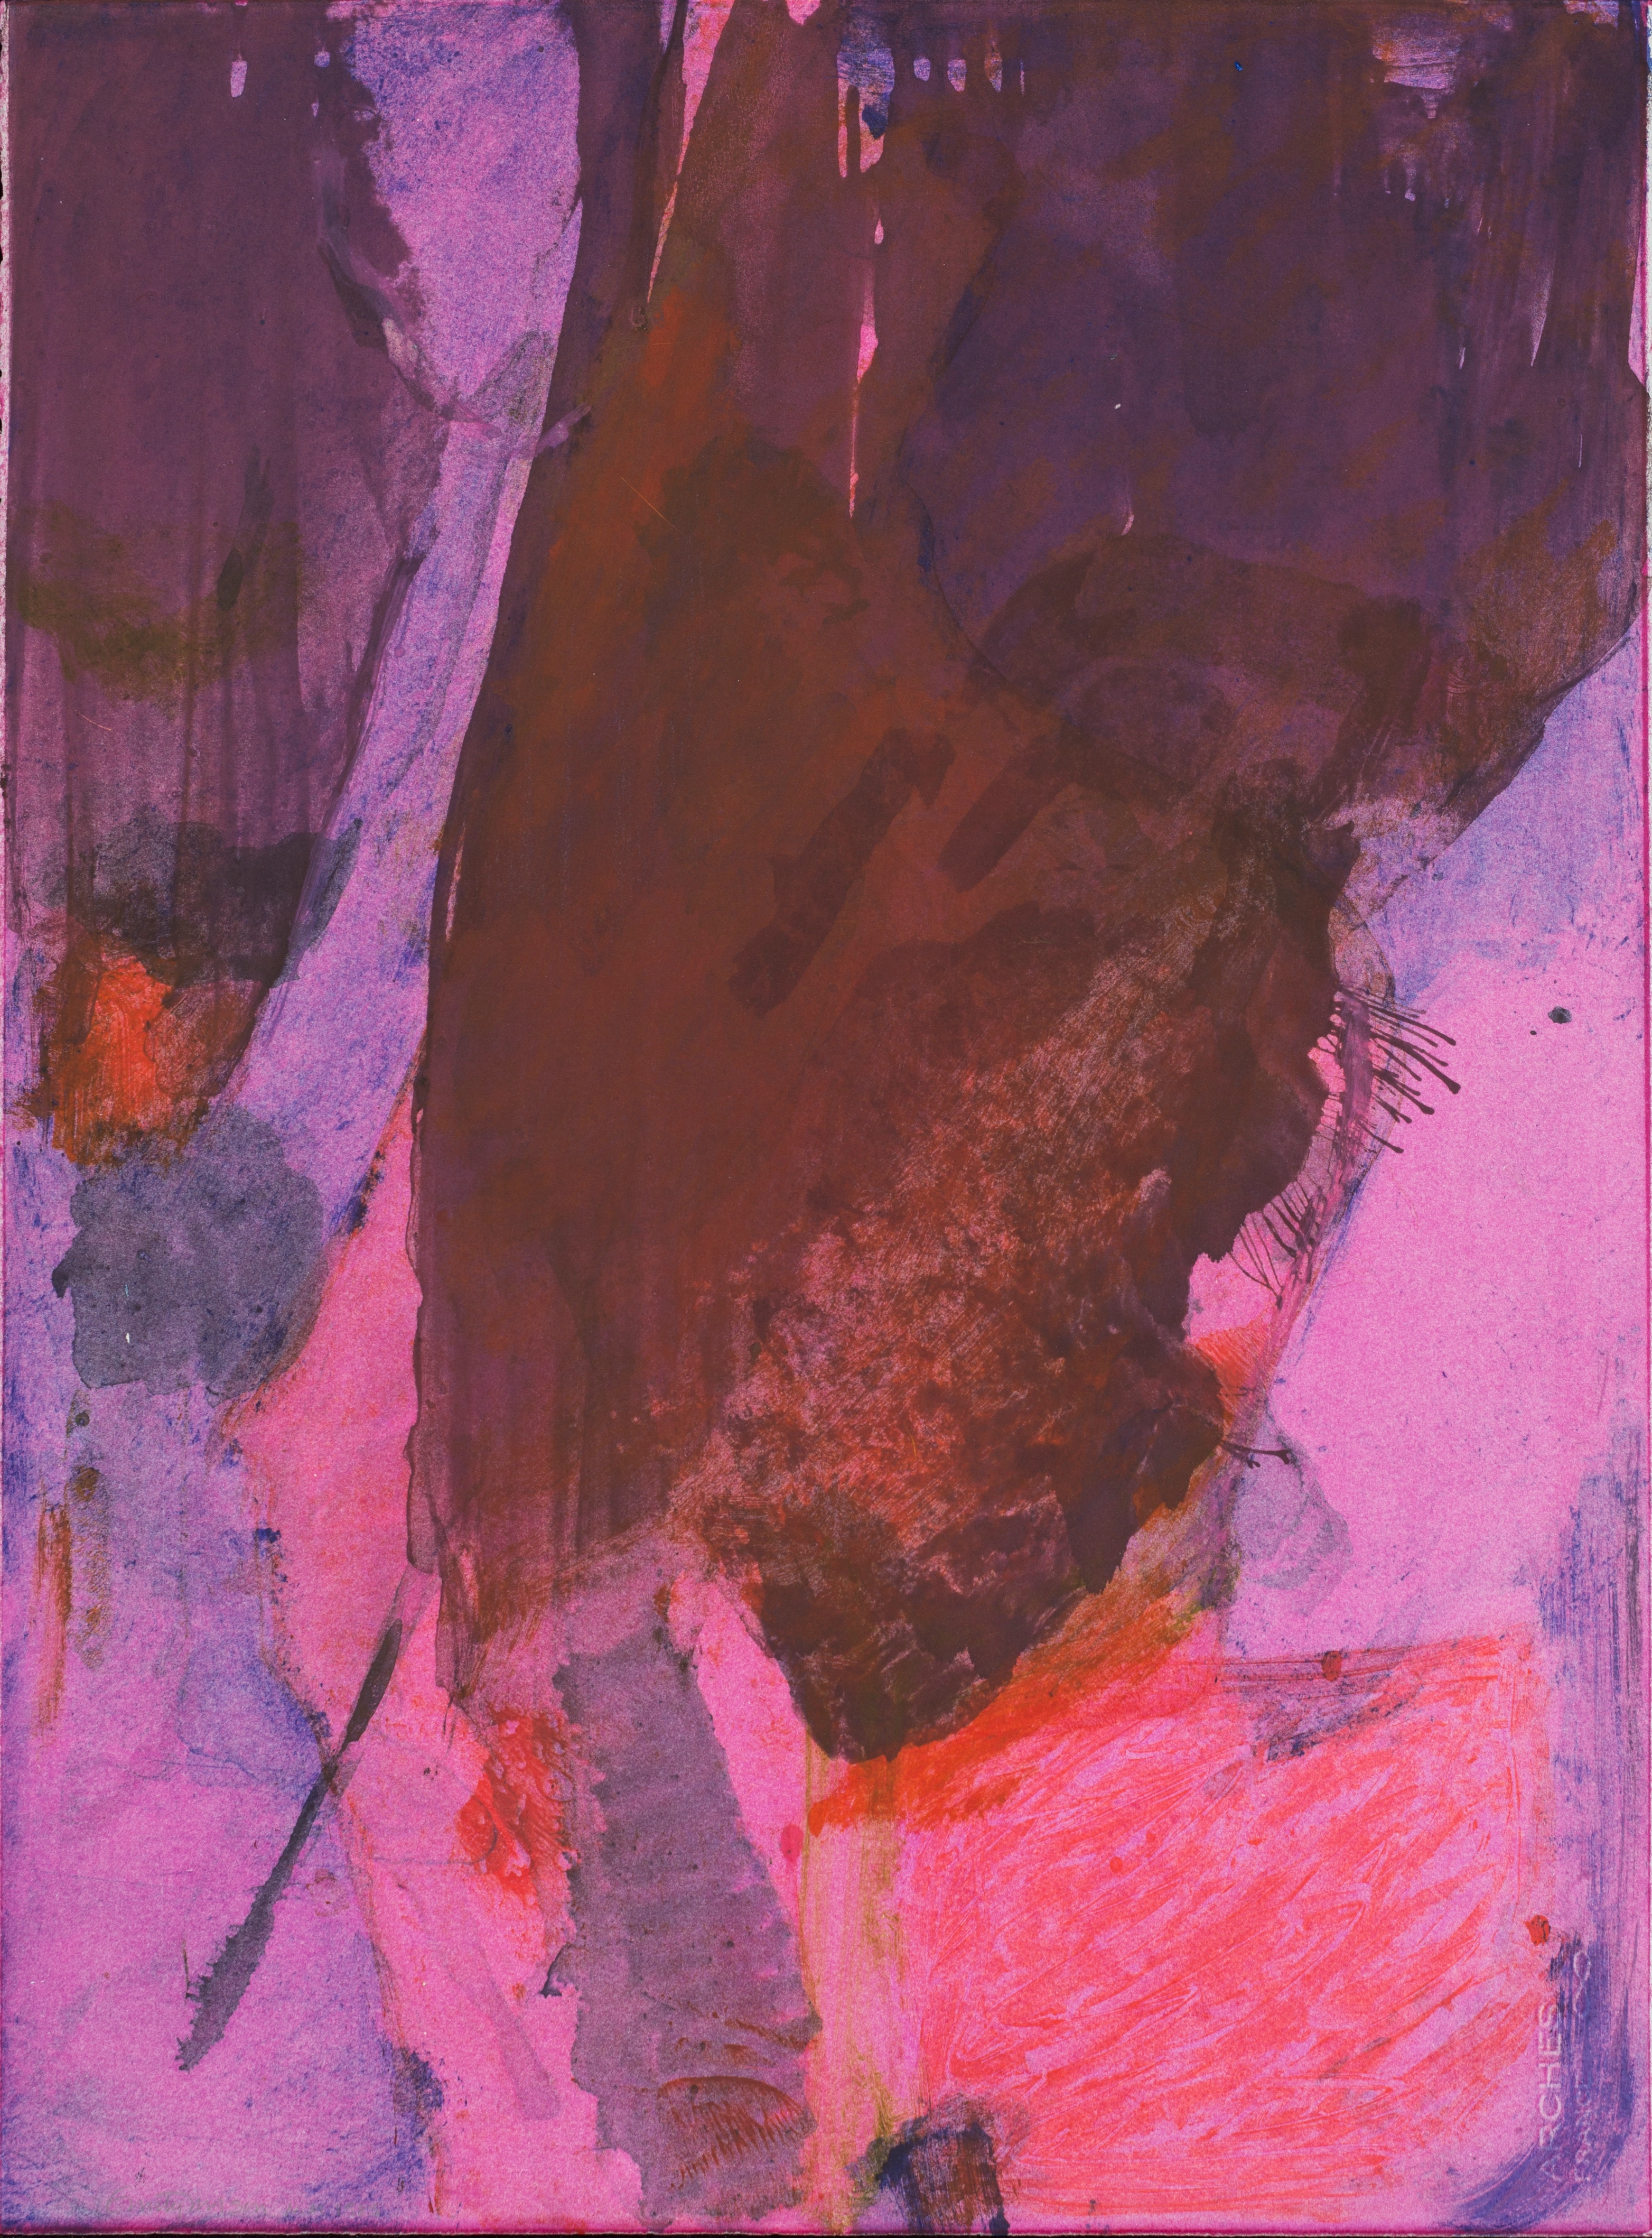 Abstract print on paper comprised of purples, reds, pinks, and blue colors.